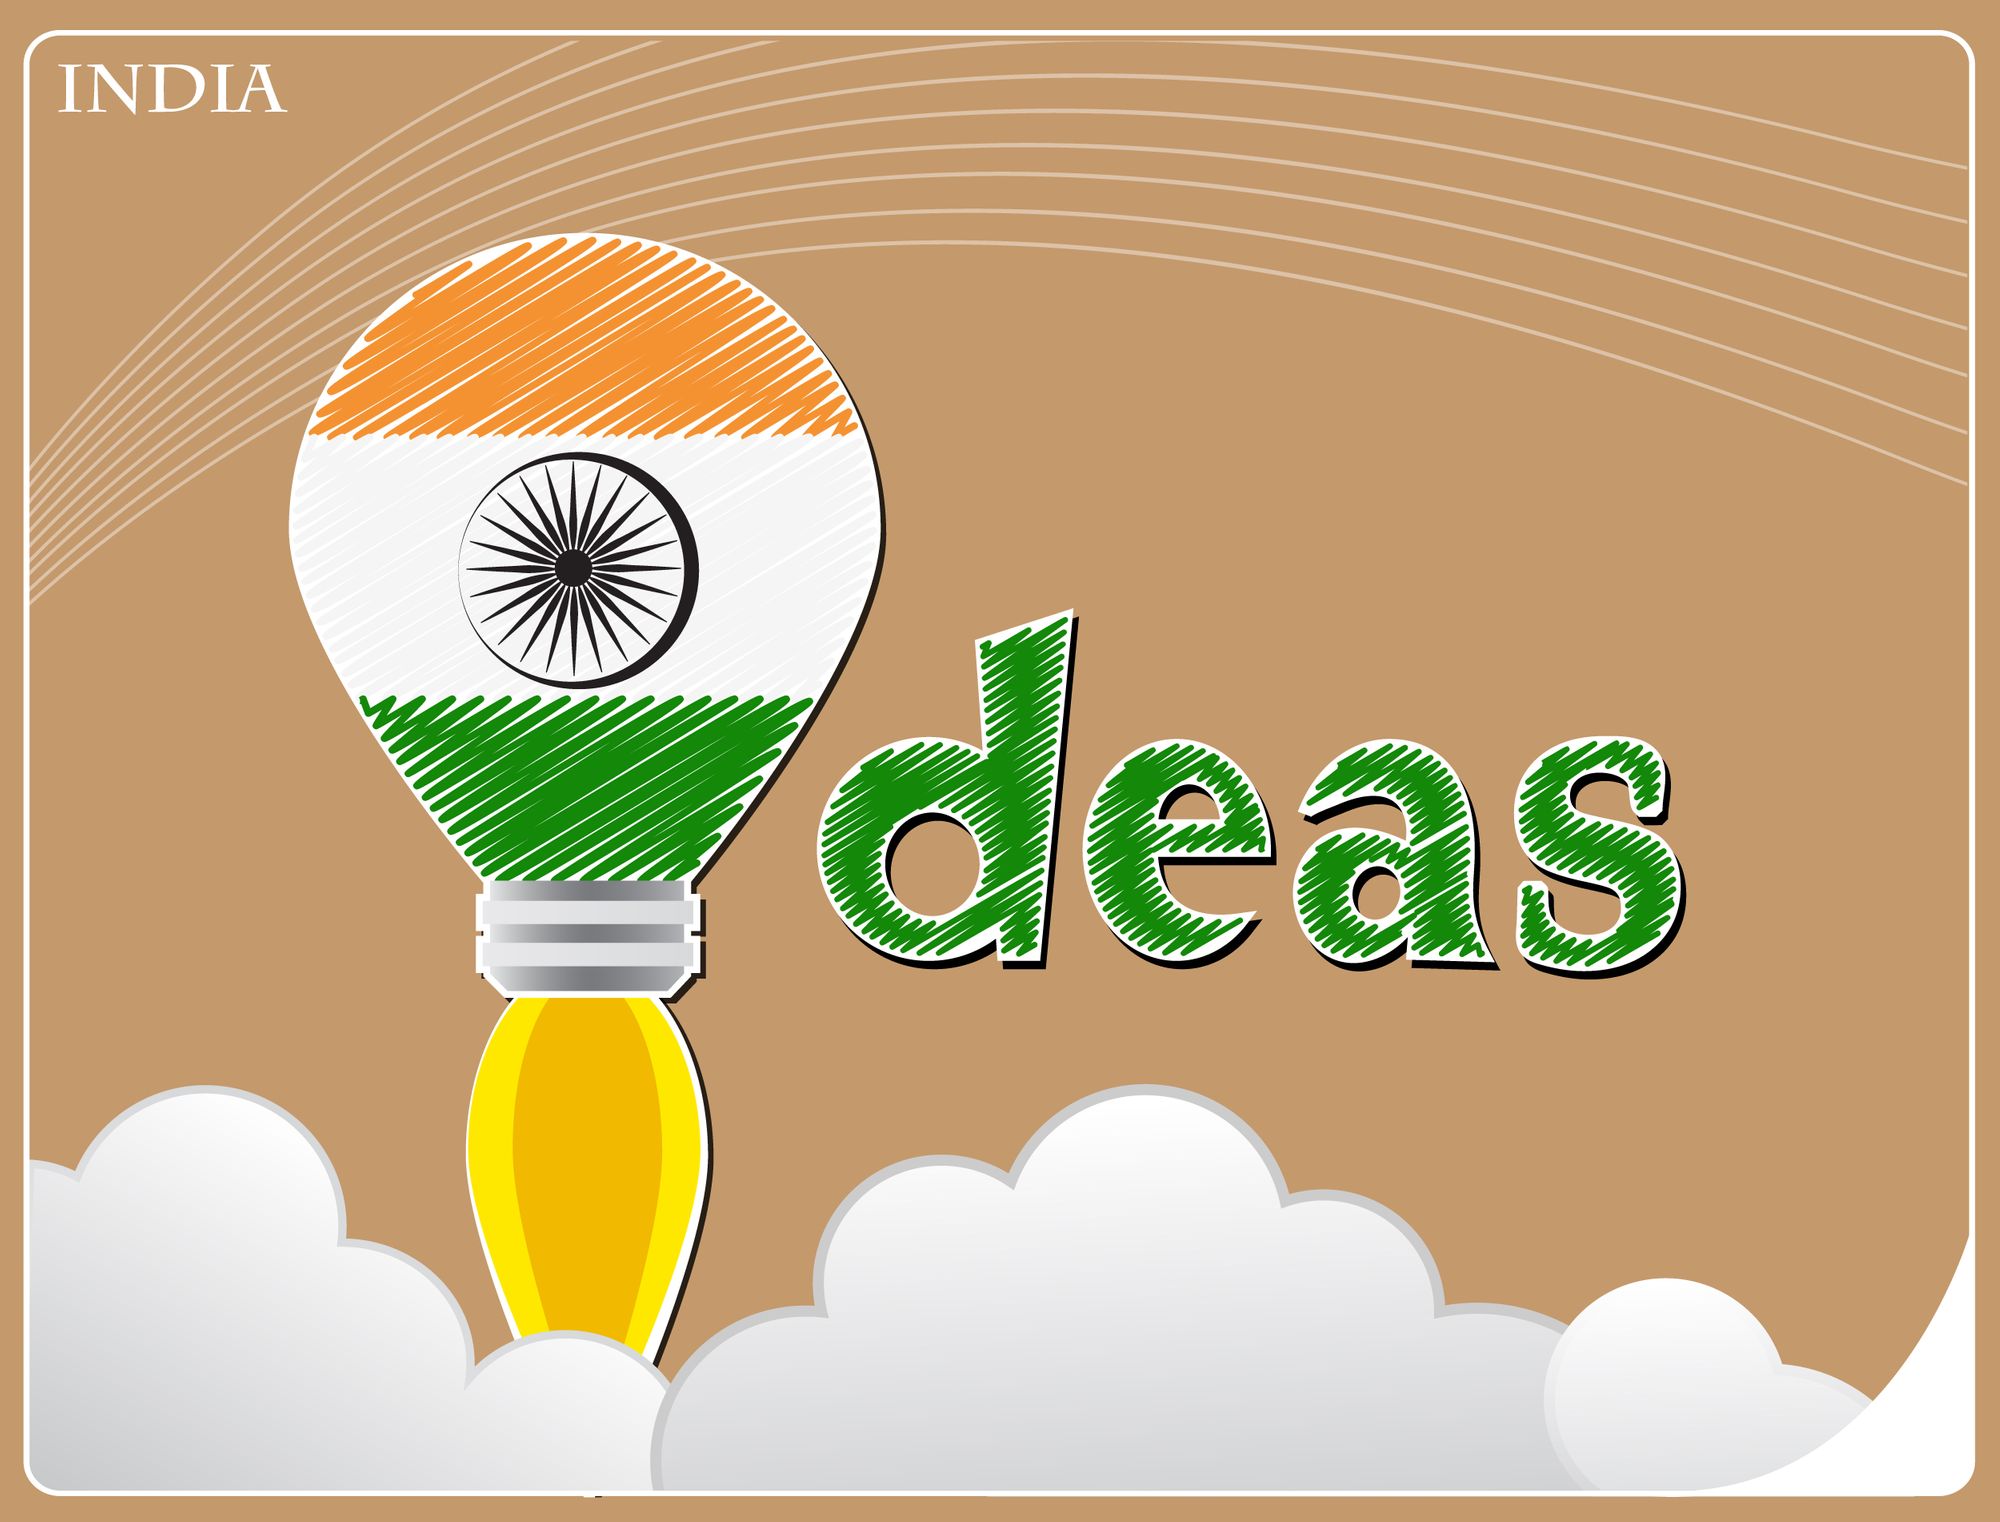 Idea concept made from the flag of India